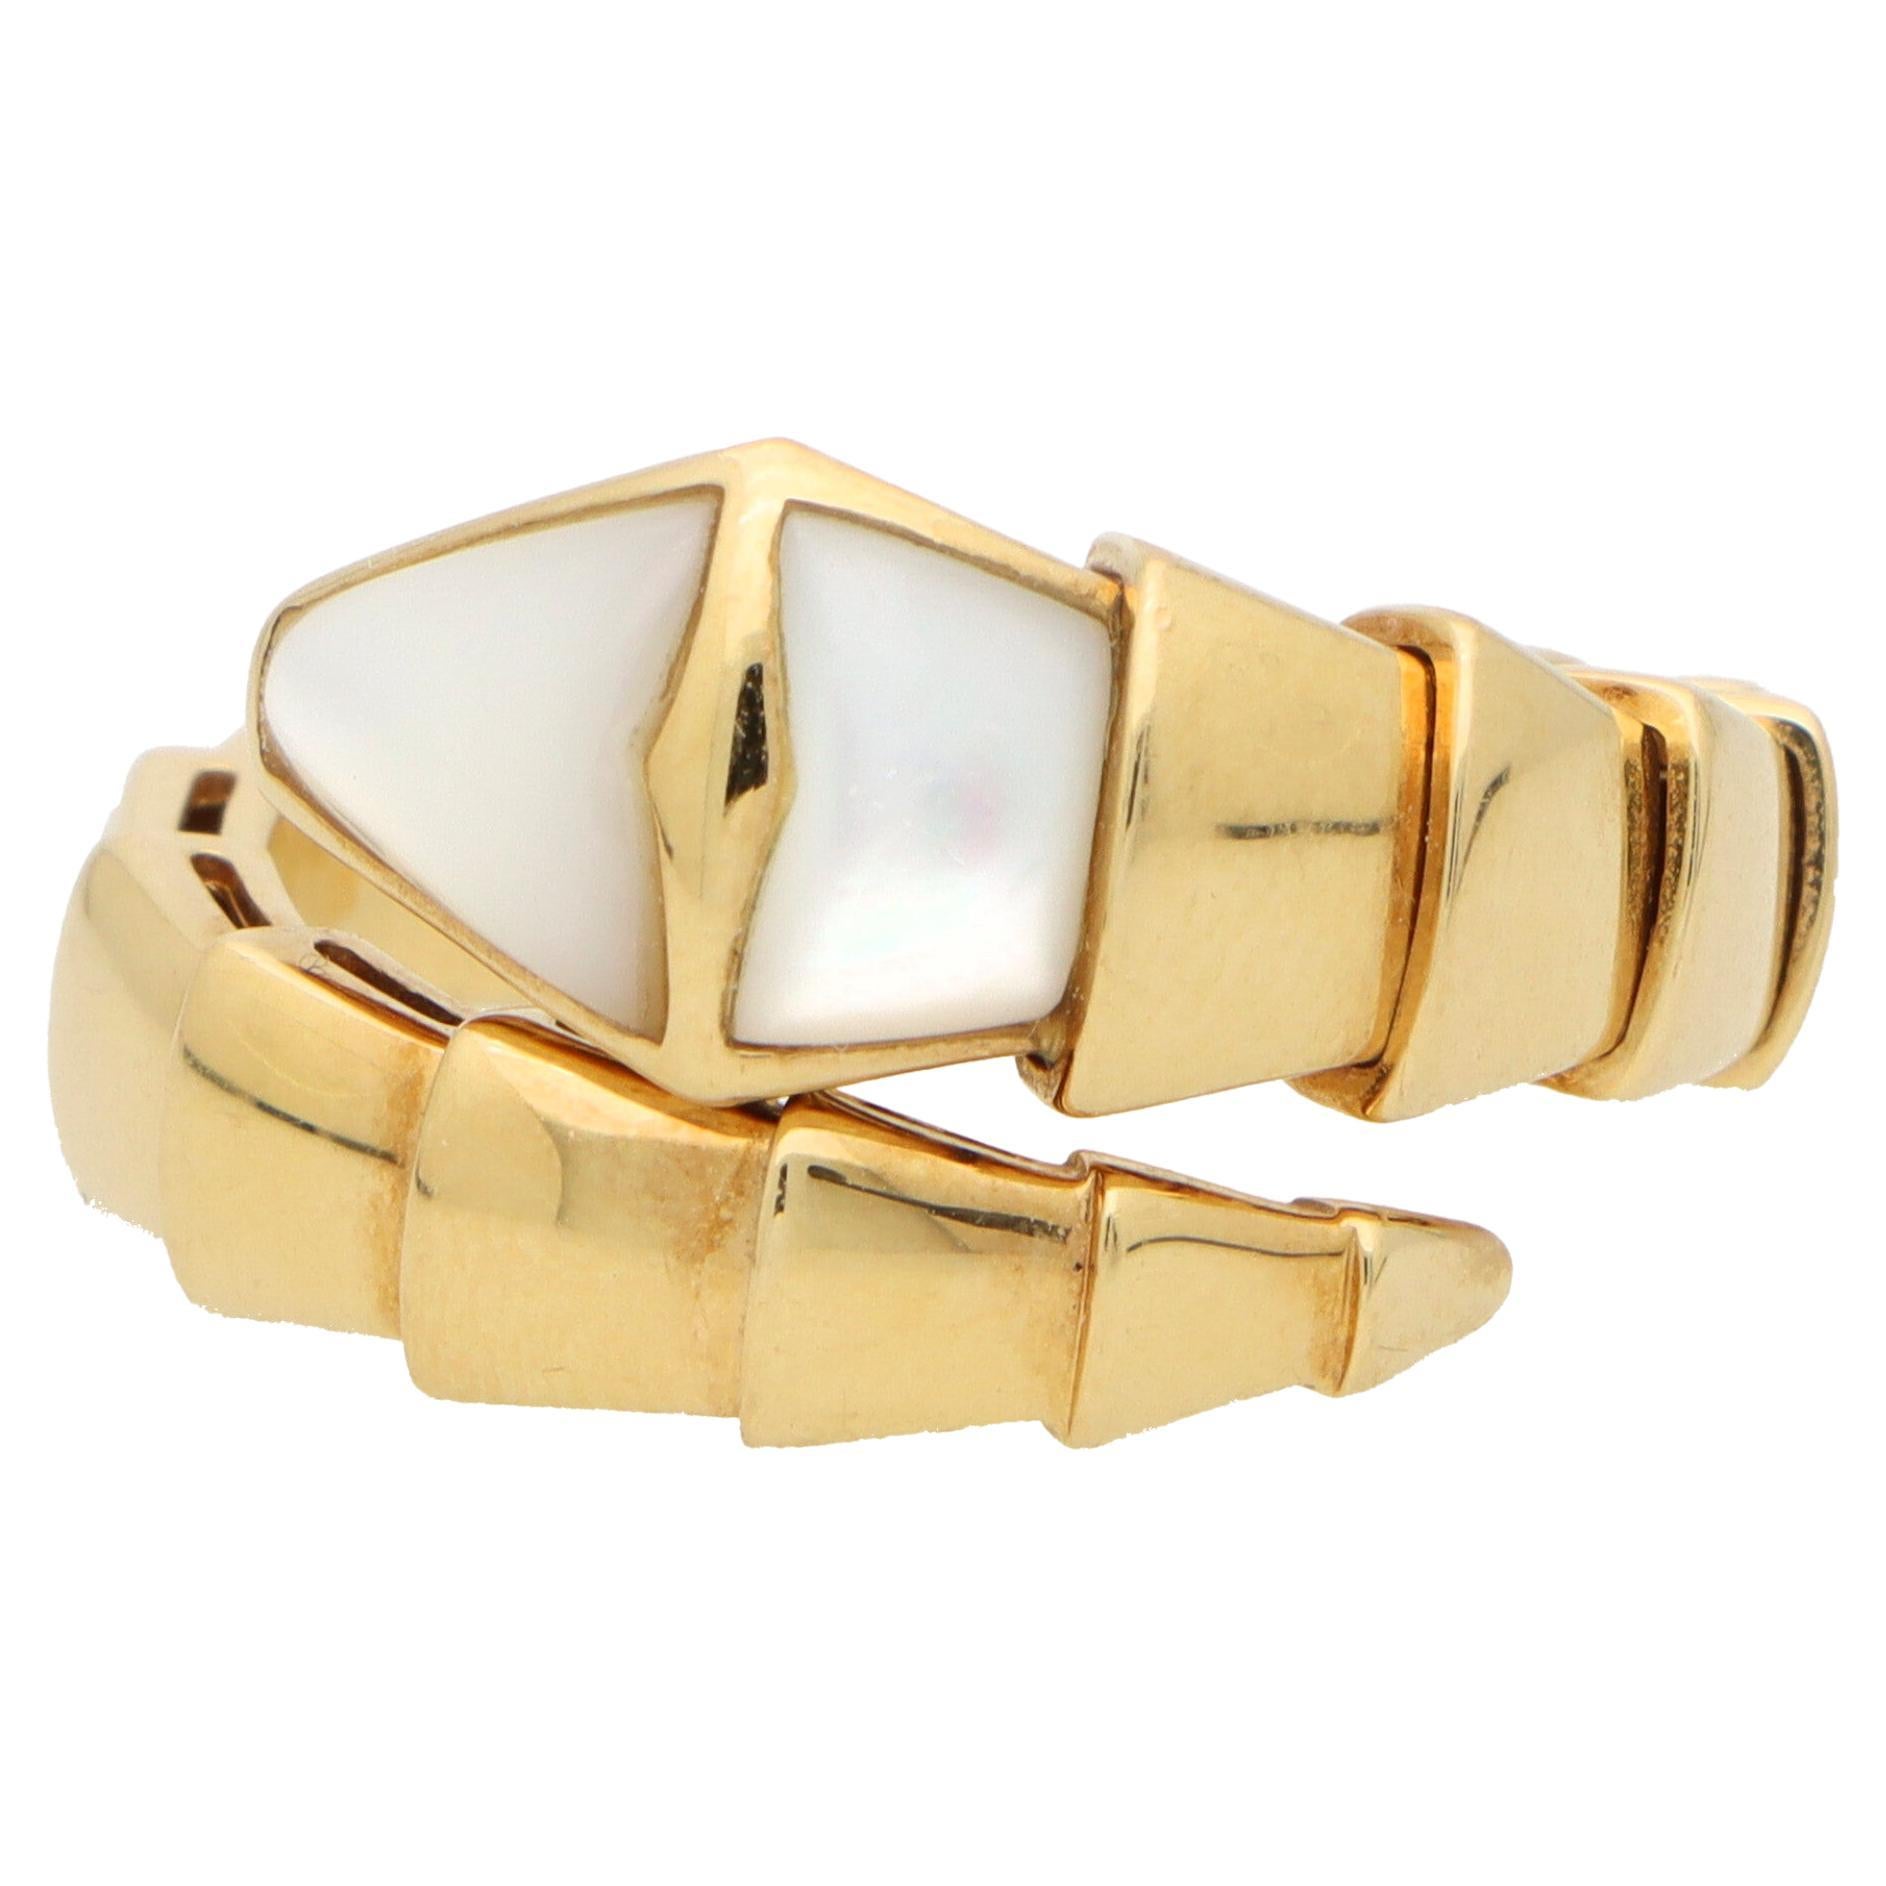 Vintage Bvlgari Mother of Pearl Serpenti Viper Ring in 18k Yellow Gold